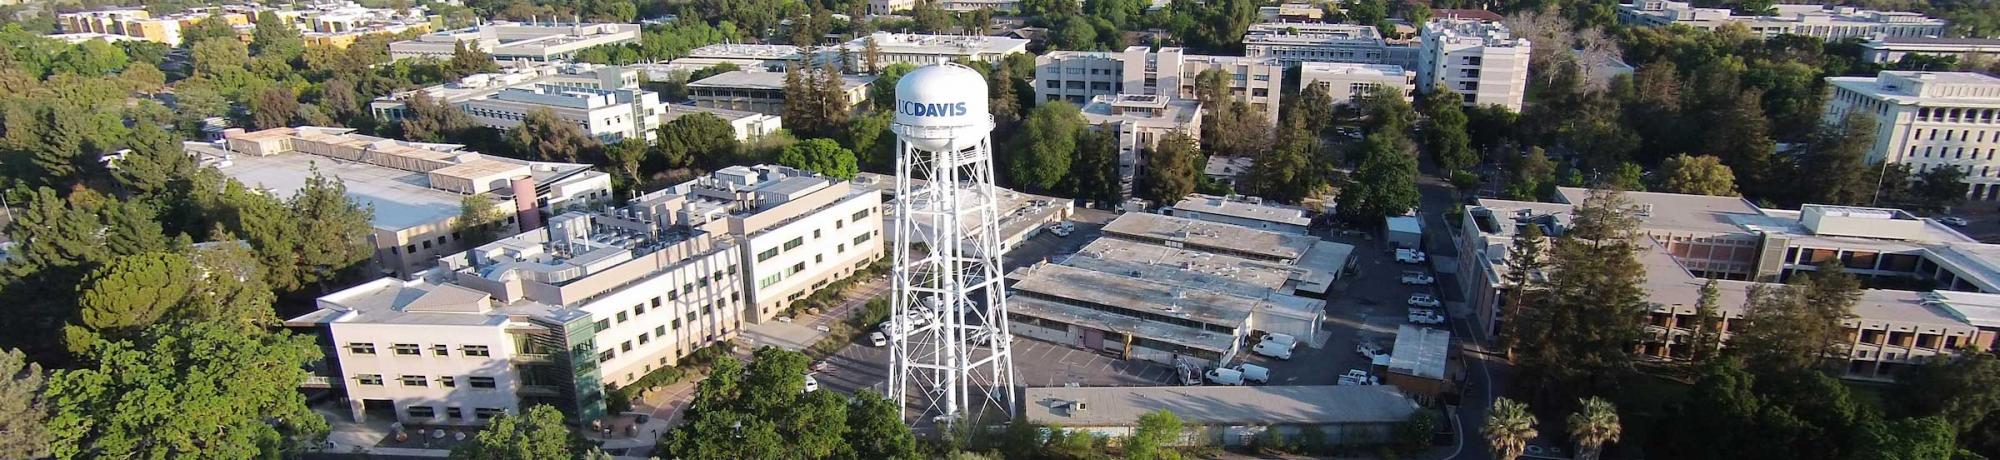 Aerial Shot of UC Davis Water Tower and Campus